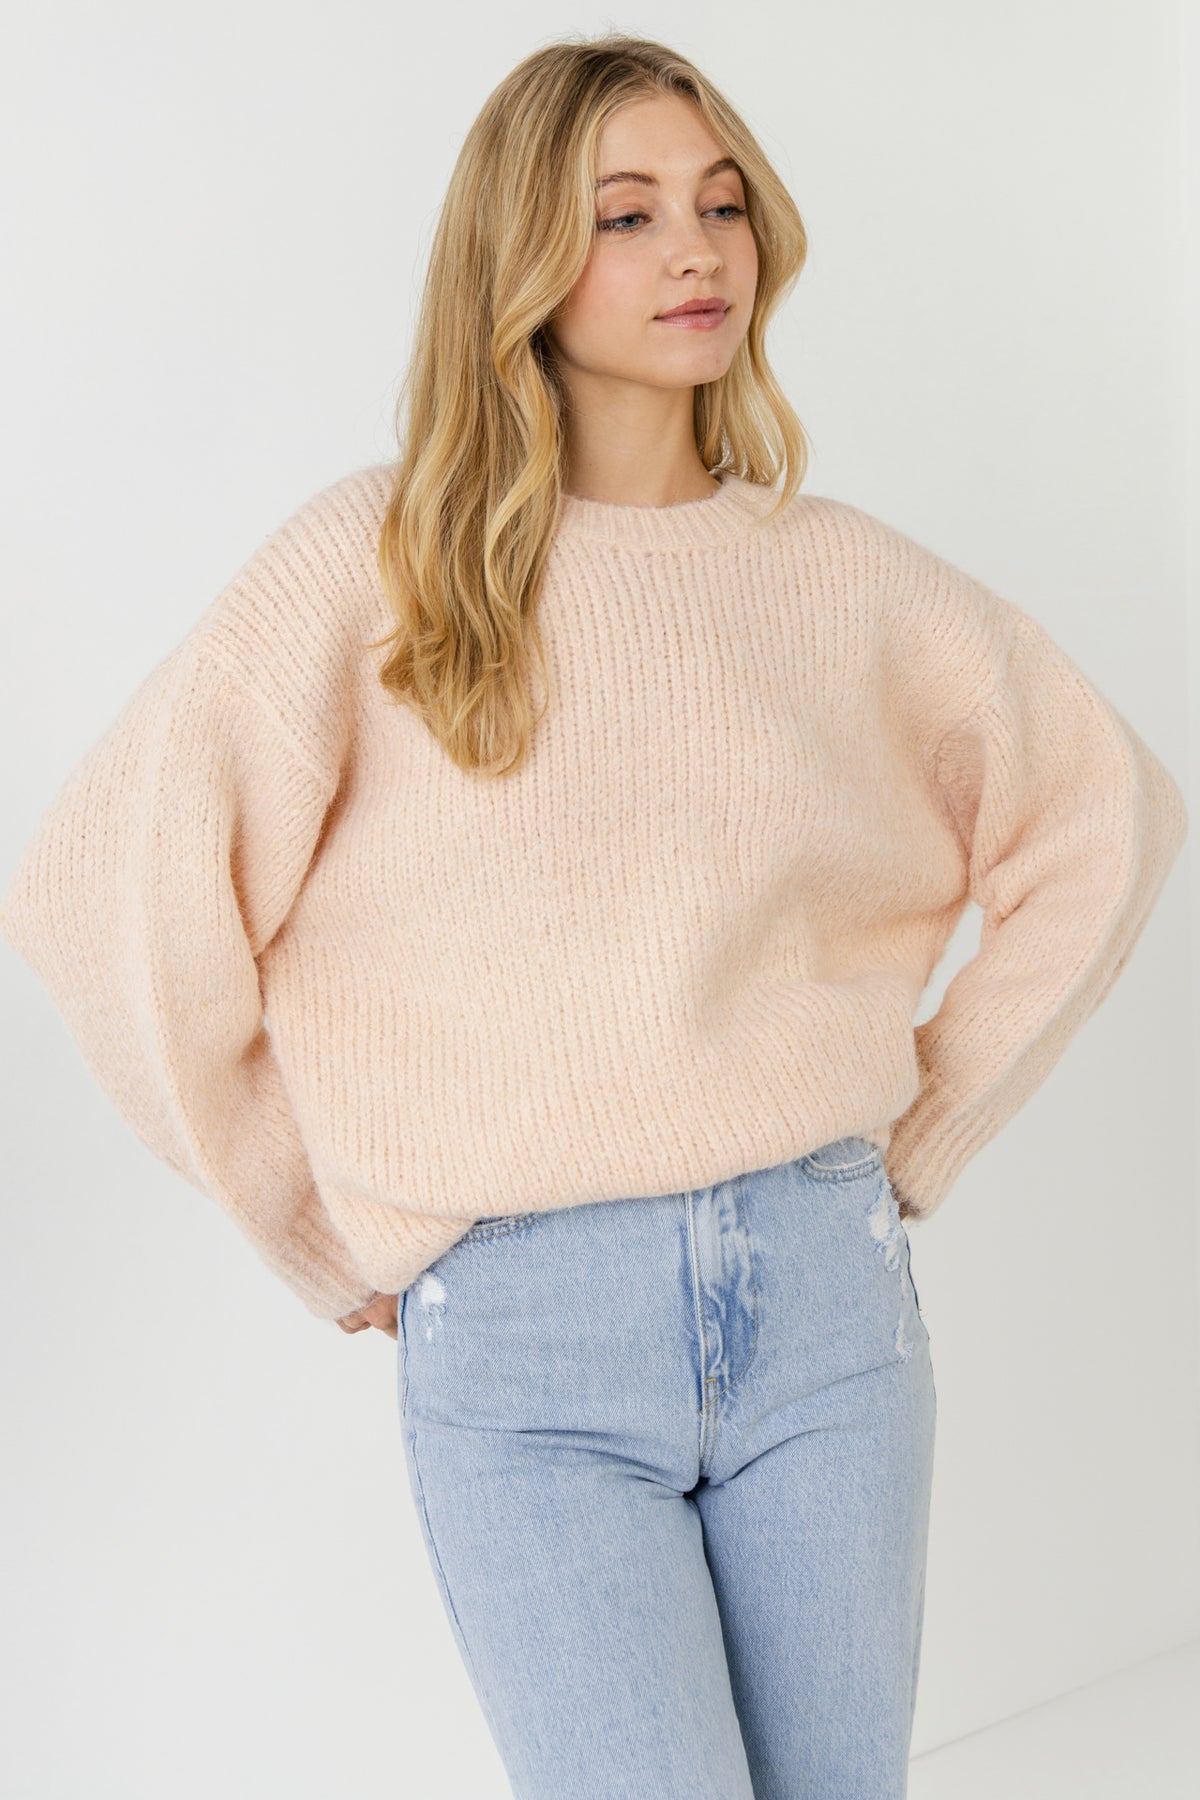 FREE THE ROSES - Oversized Chunky Knit Sweater - SWEATERS & KNITS available at Objectrare